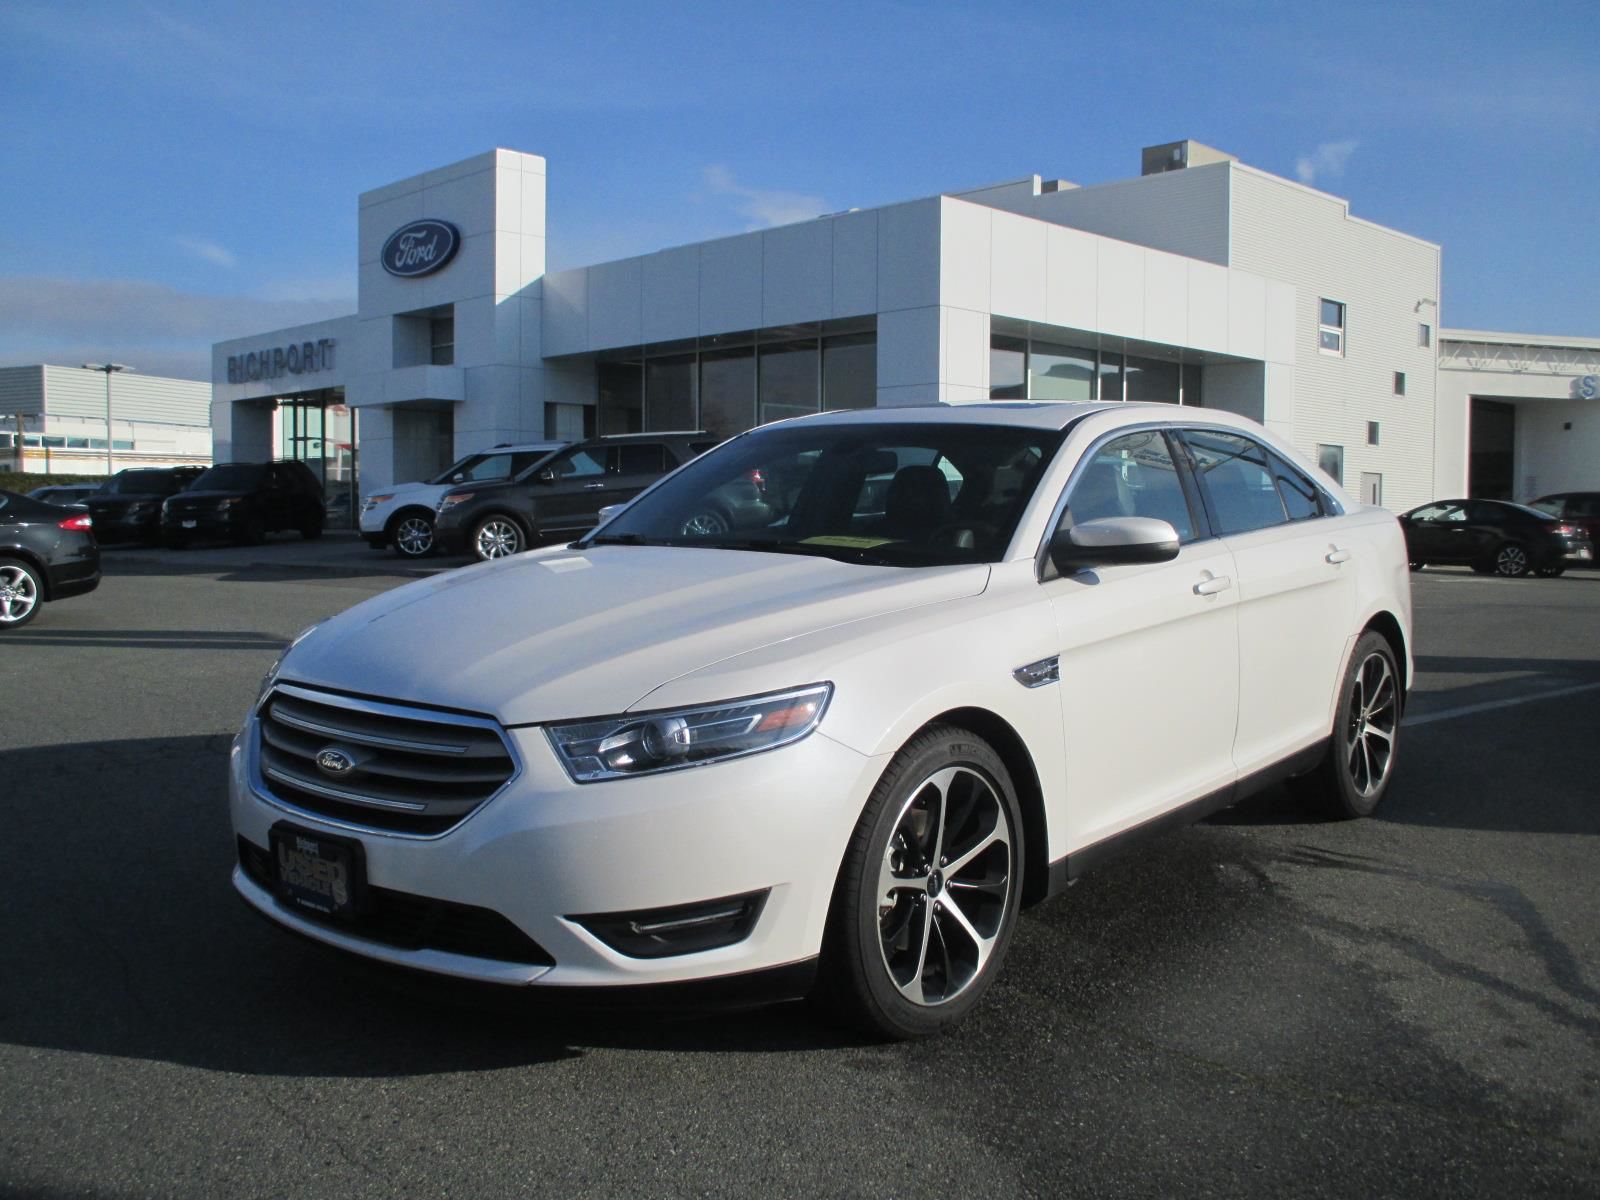 Richport ford used vehicles #7